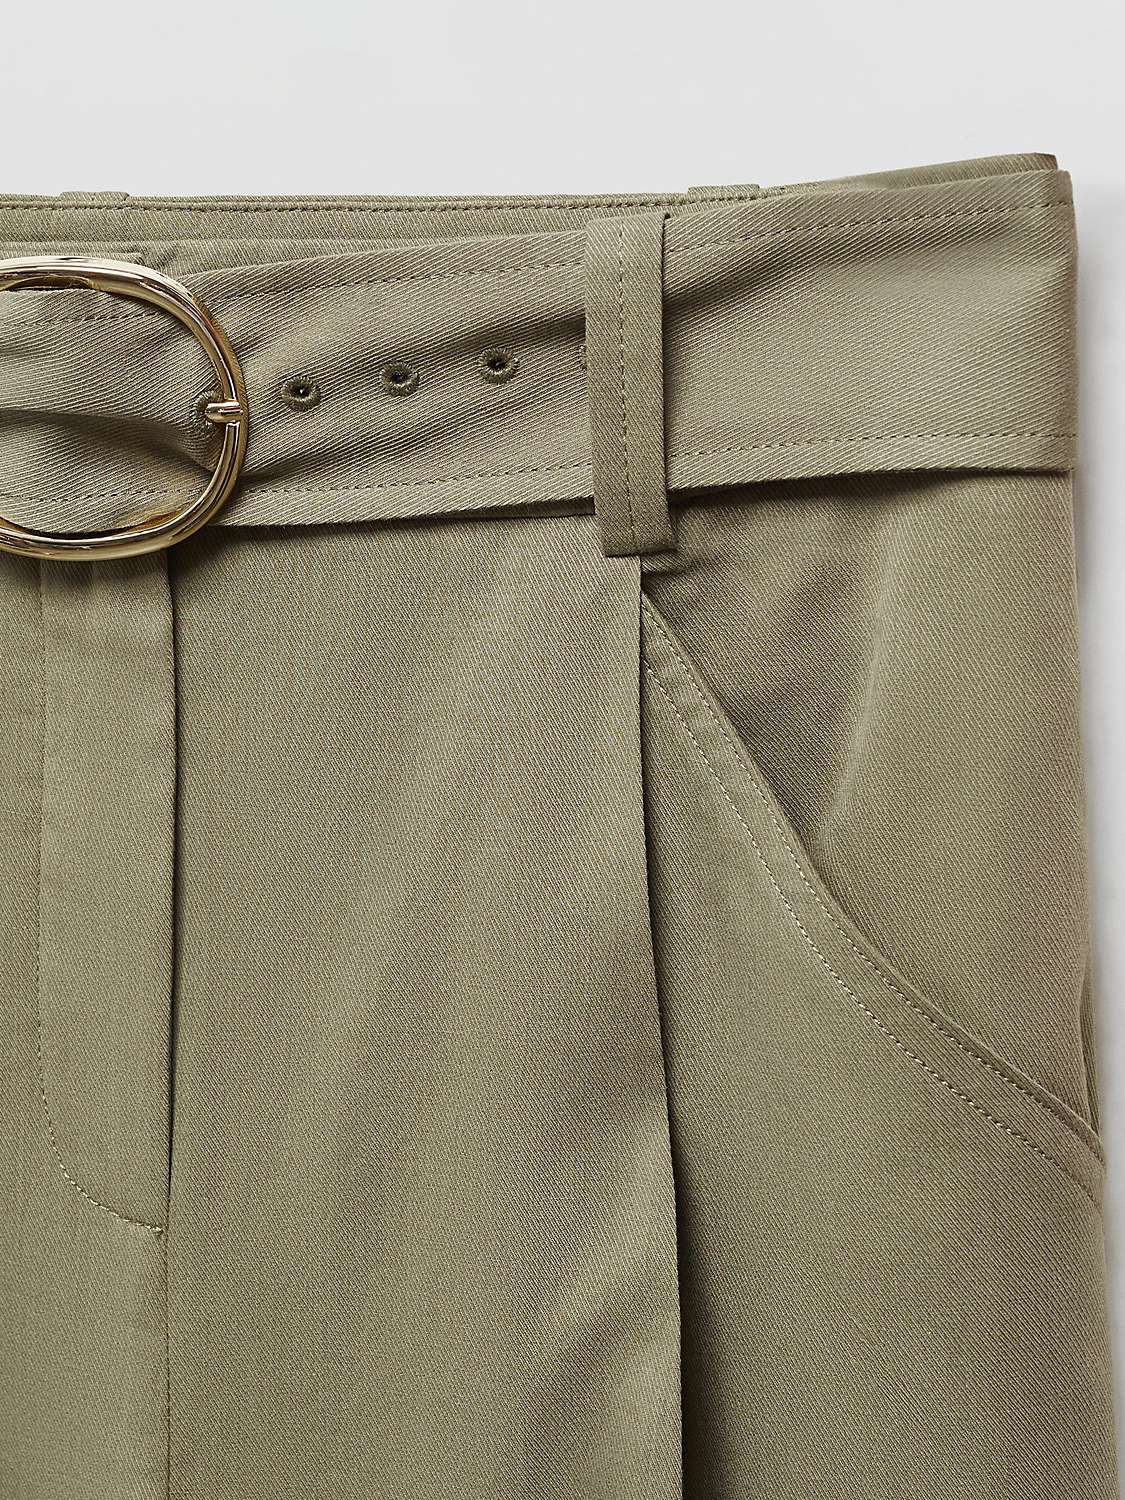 Buy Mango Angie Belted Wide Leg Trousers, Khaki Online at johnlewis.com